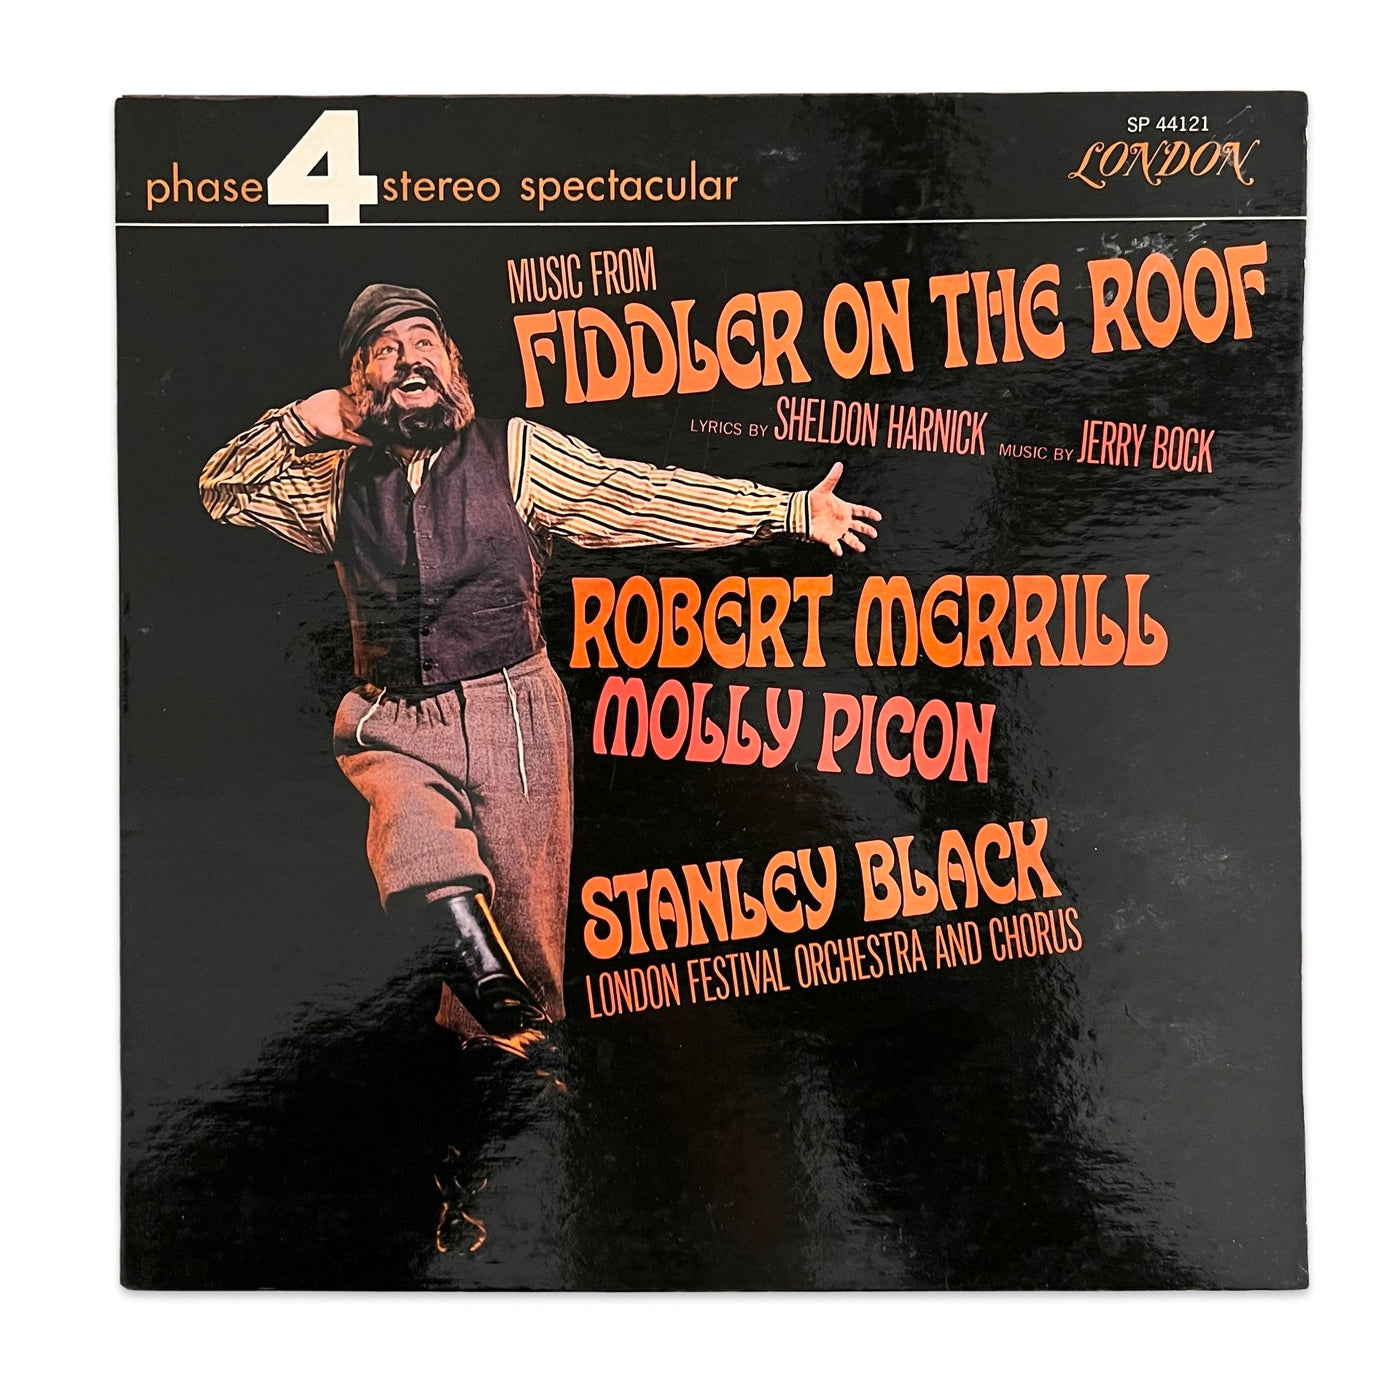 Robert Merrill, Molly Picon, Stanley Black, London Festival Orchestra And Chorus – Music From Fiddler On The Roof